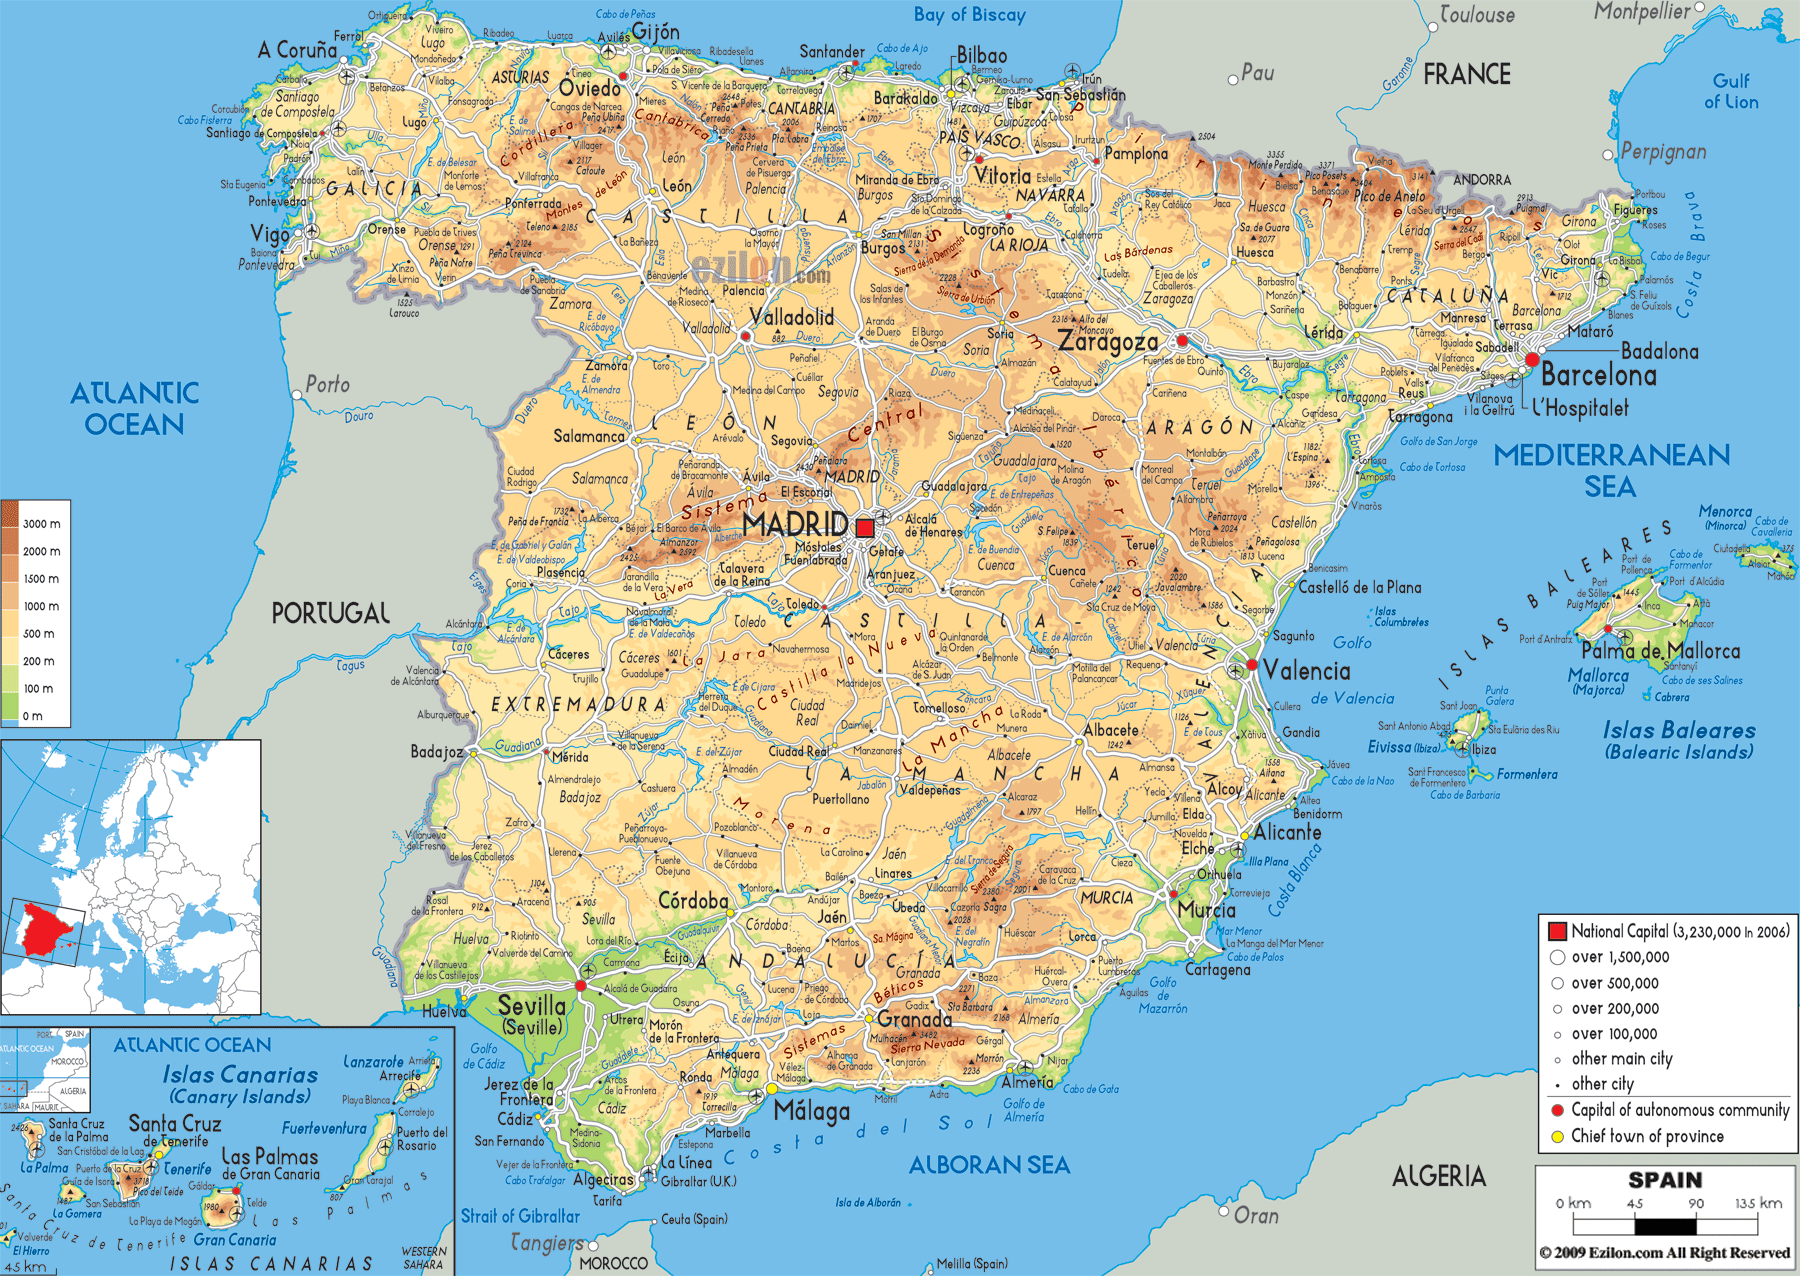 spain on map